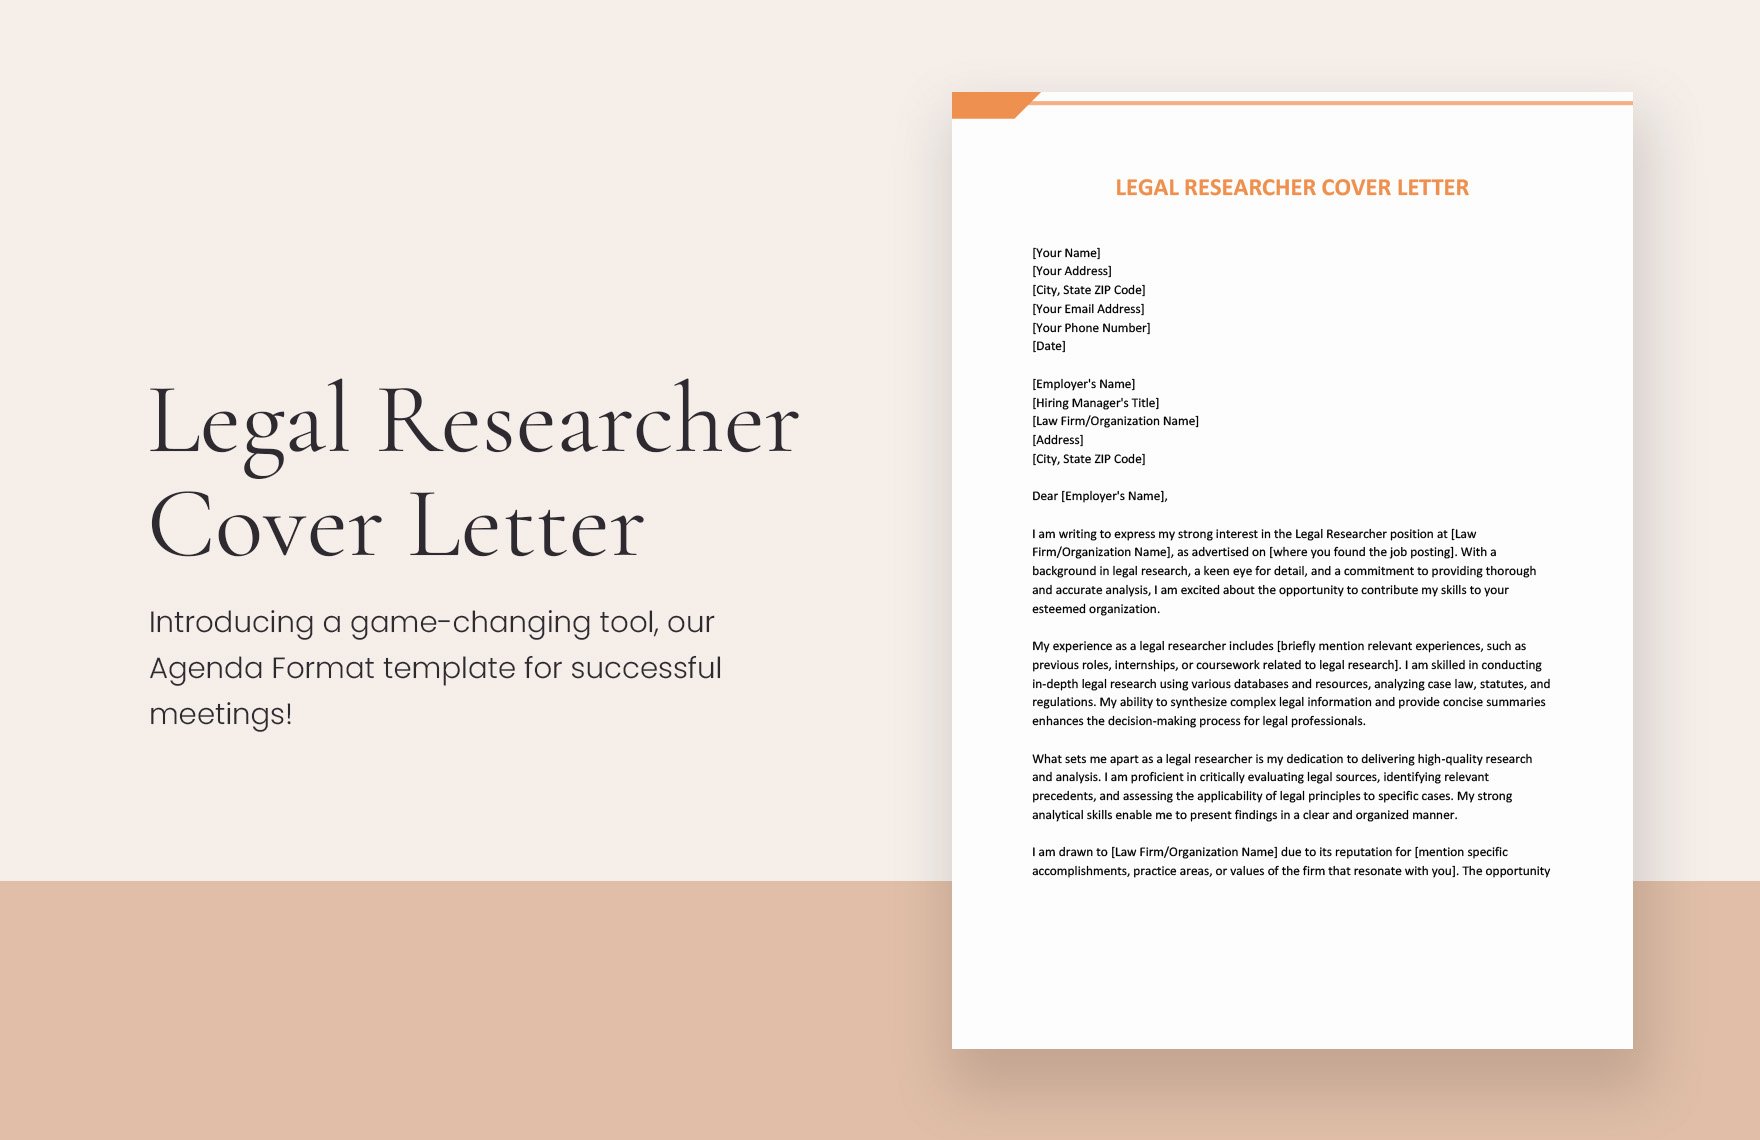 Legal Researcher Cover Letter